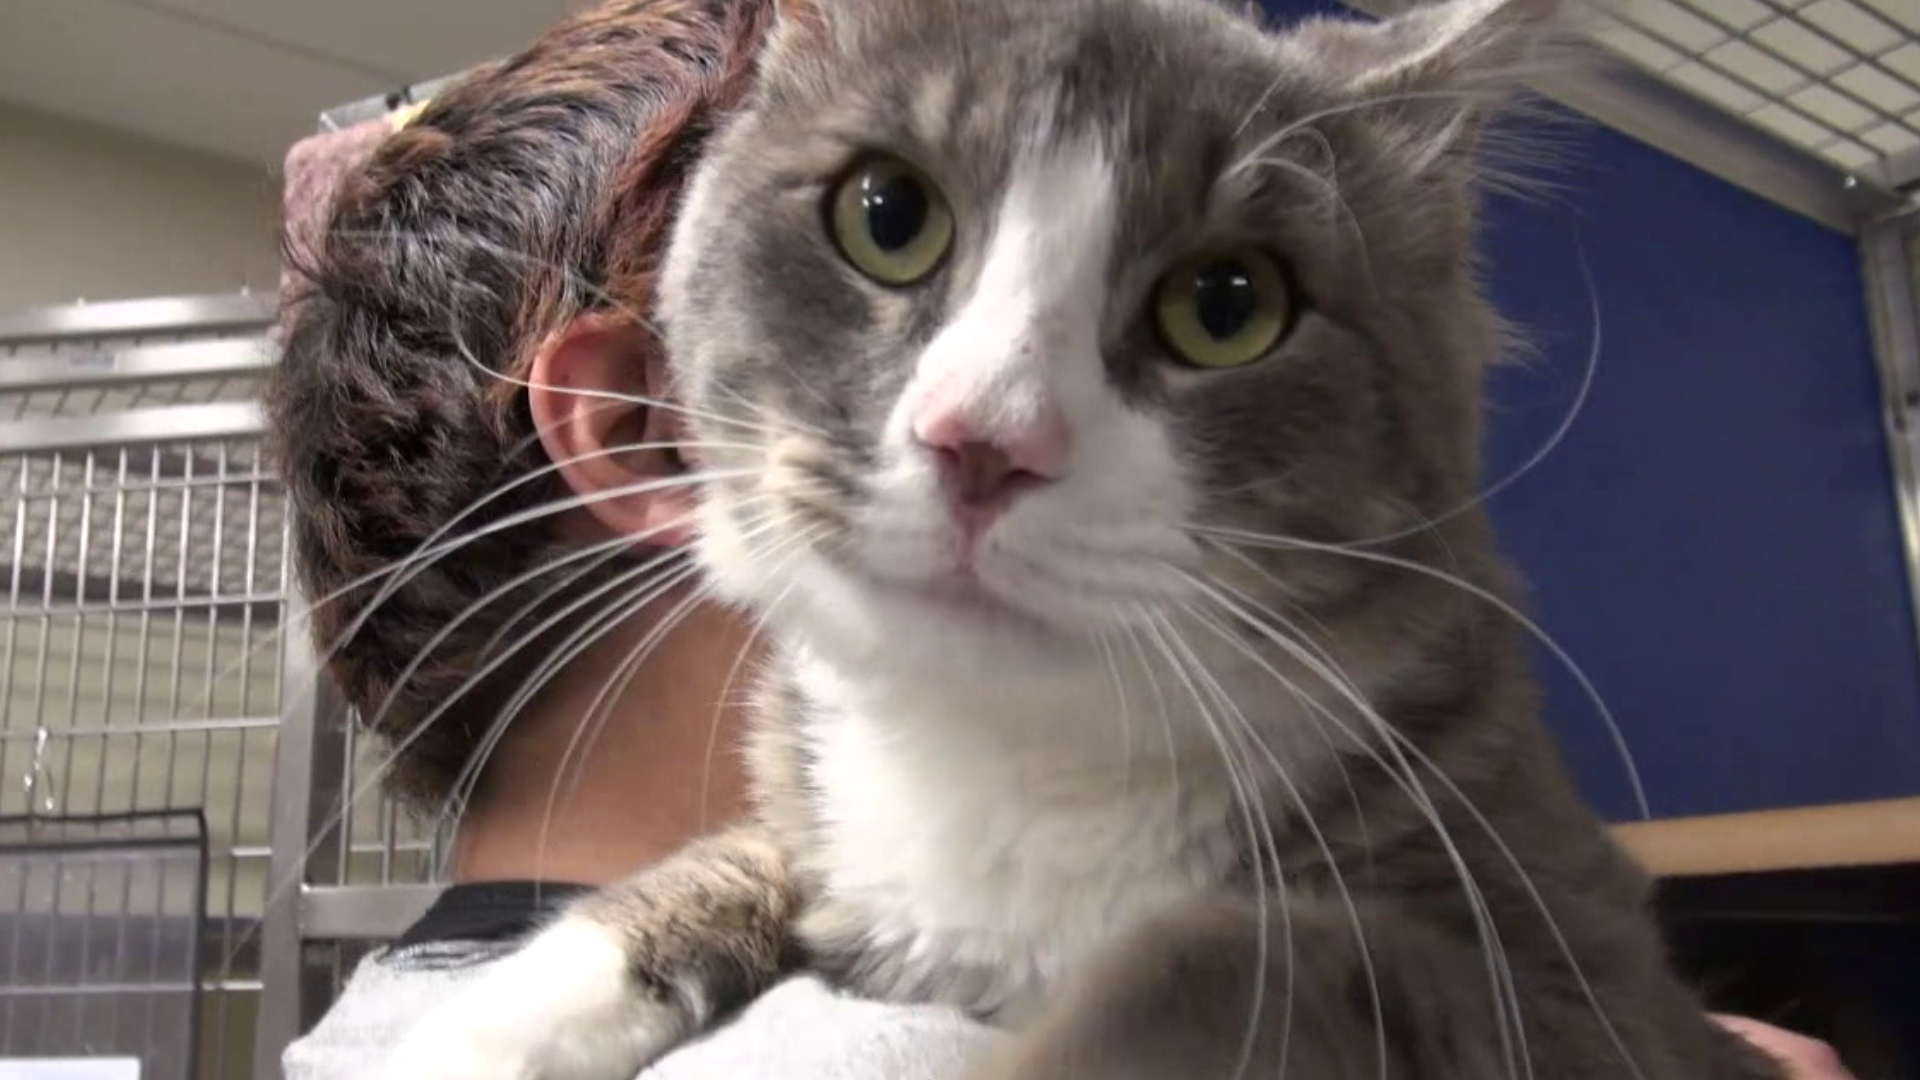 We meet a cute cast of cats at a shelter in Lackawanna County.